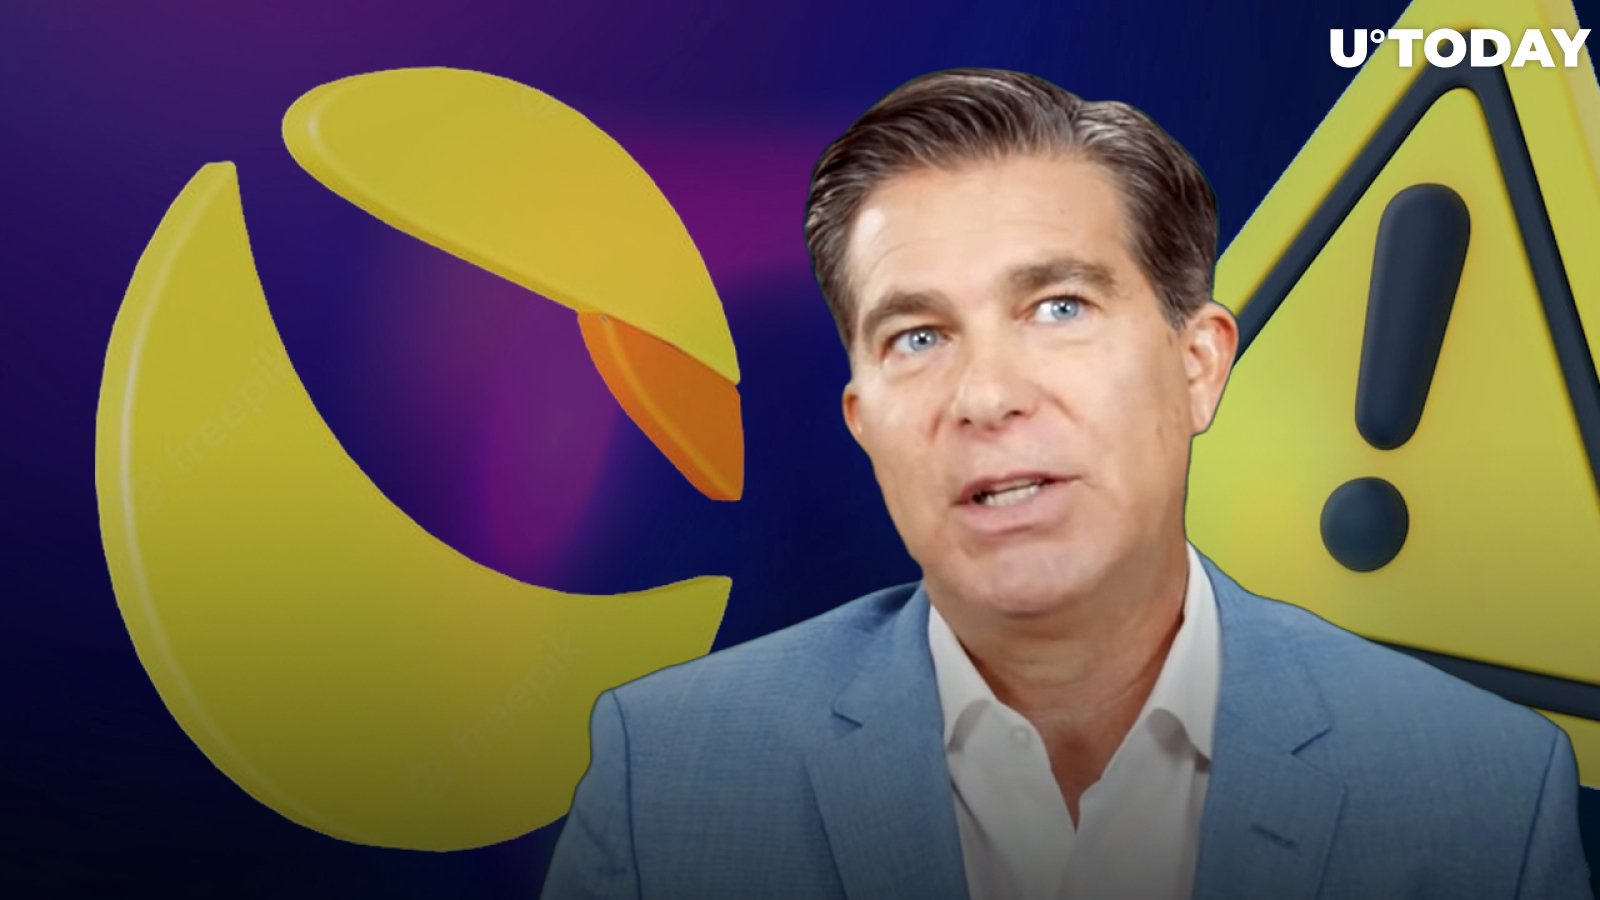 Ross Gerber Says Terra Is Just “Another Crypto Scam”